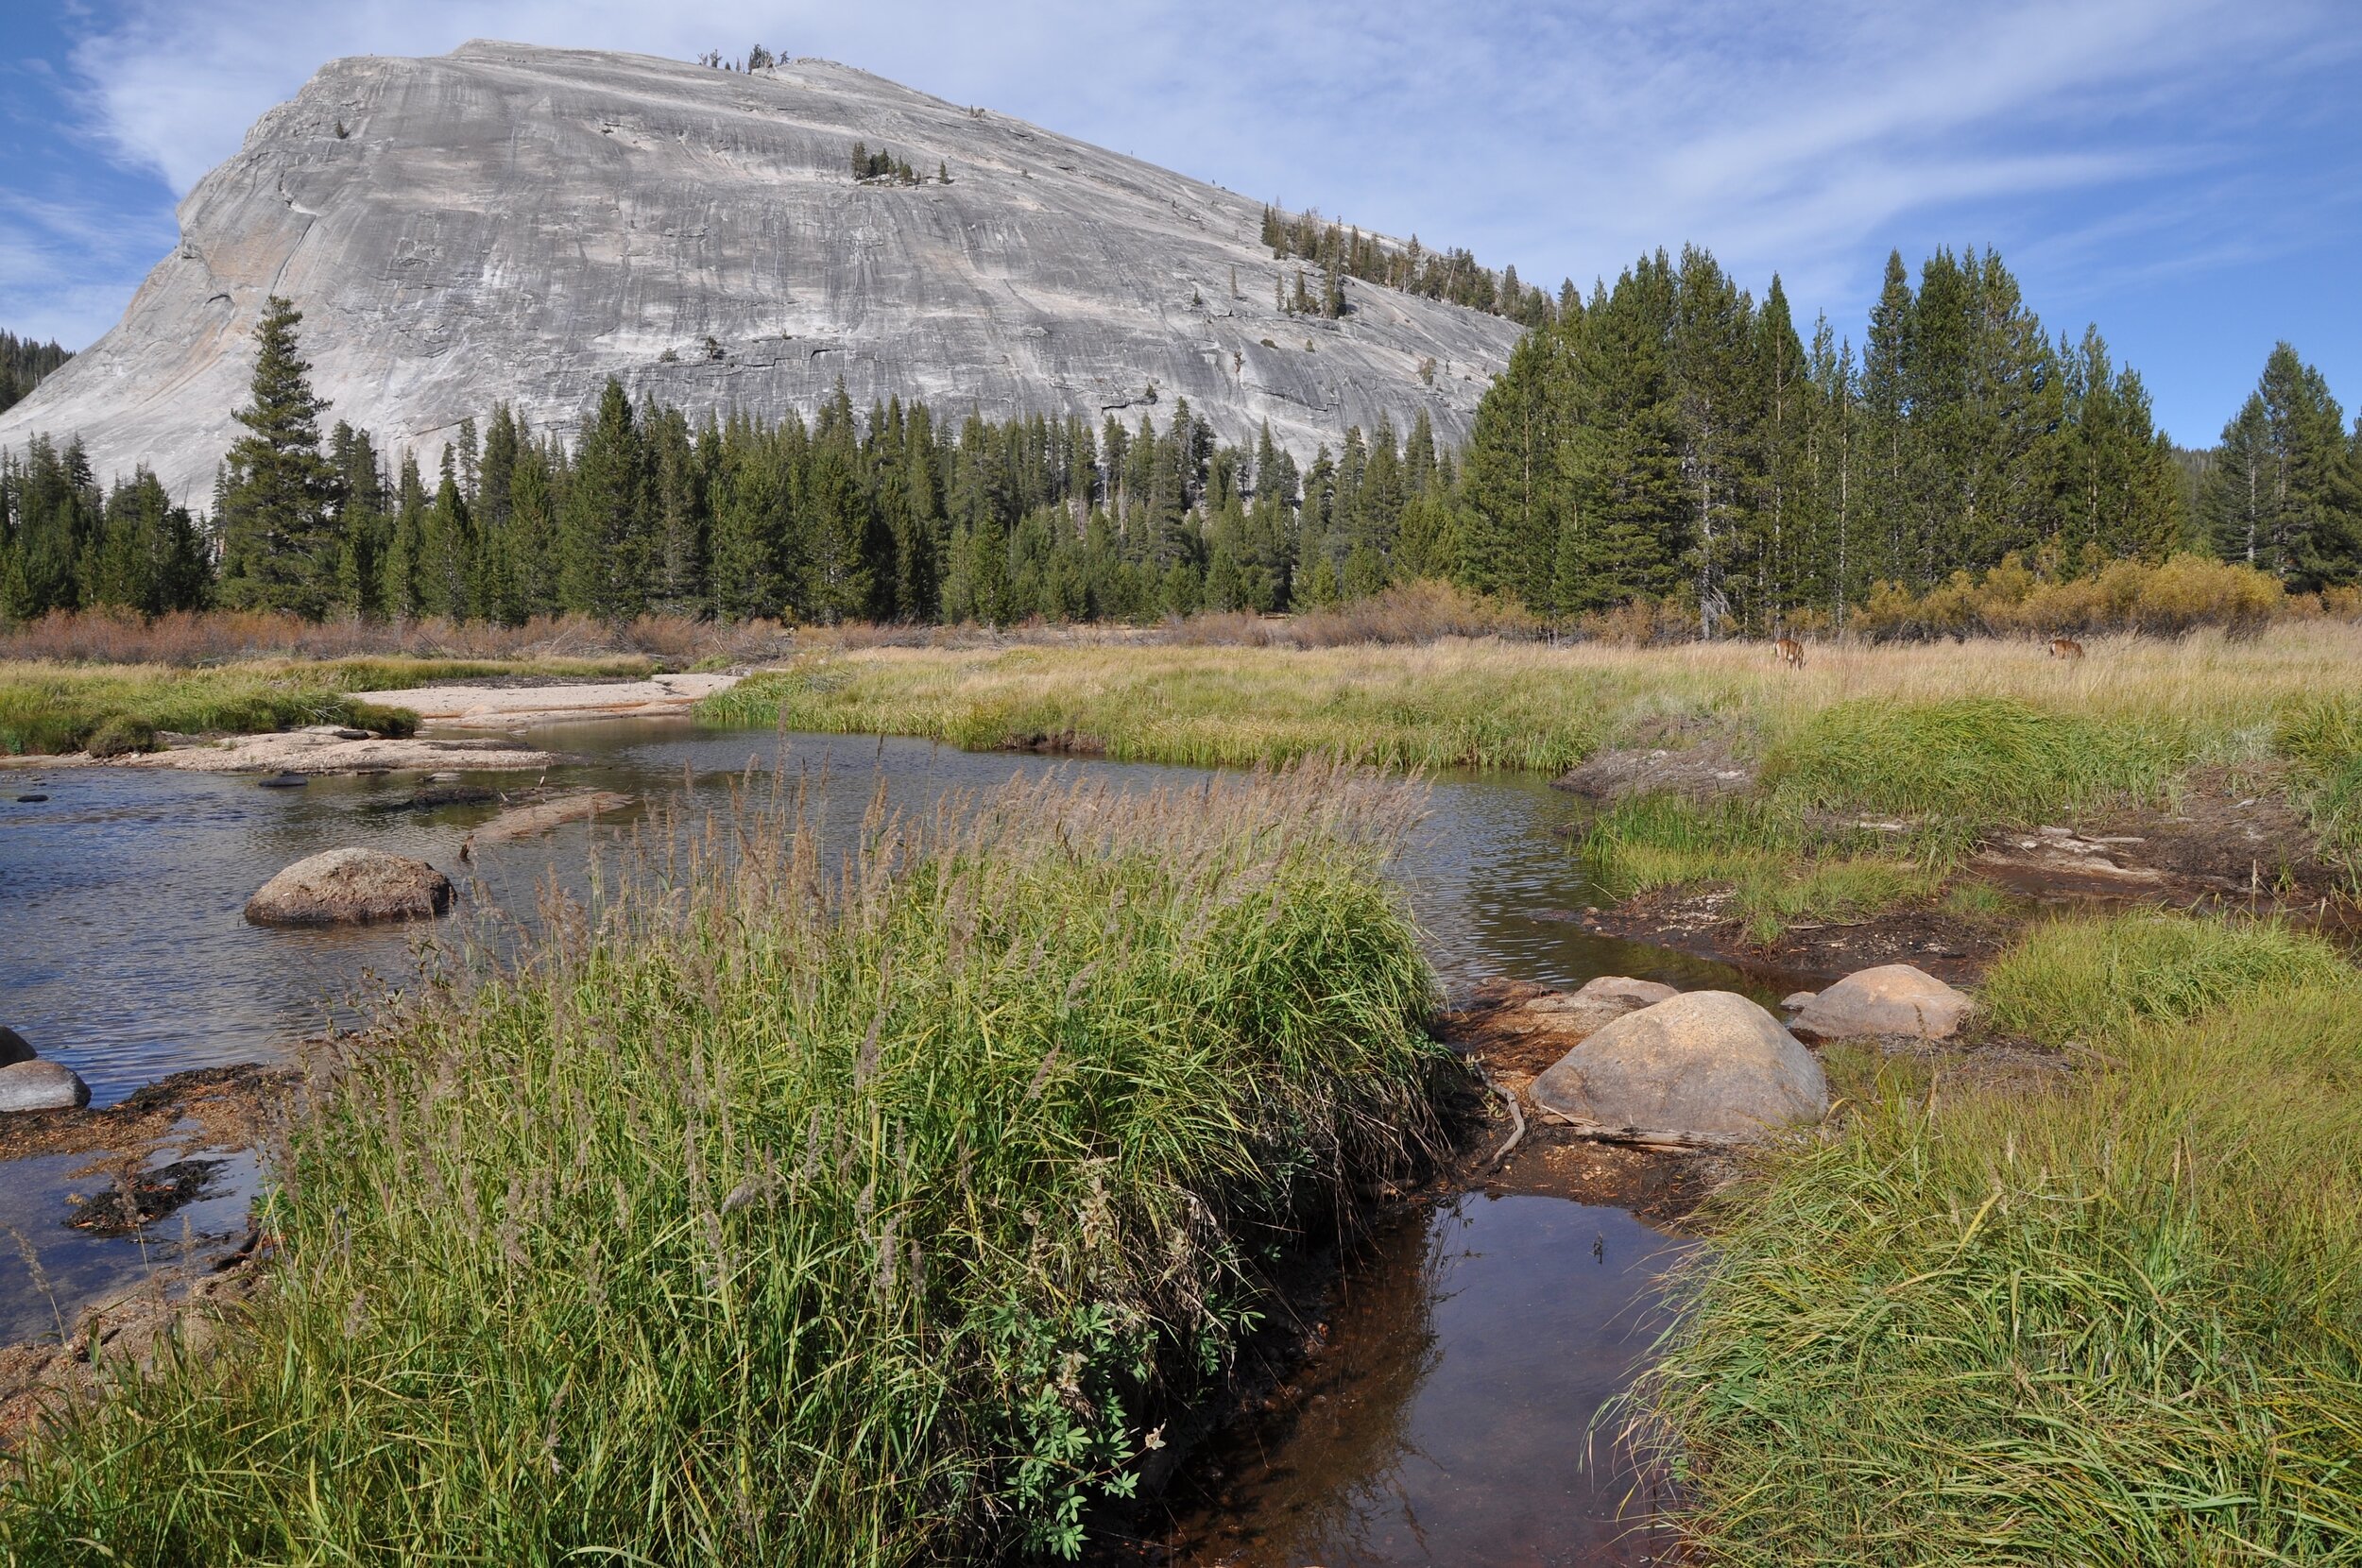  Tuolumne Meadows where the Dana Fork and the Lyell Fork combine to form the Tuolumne River 